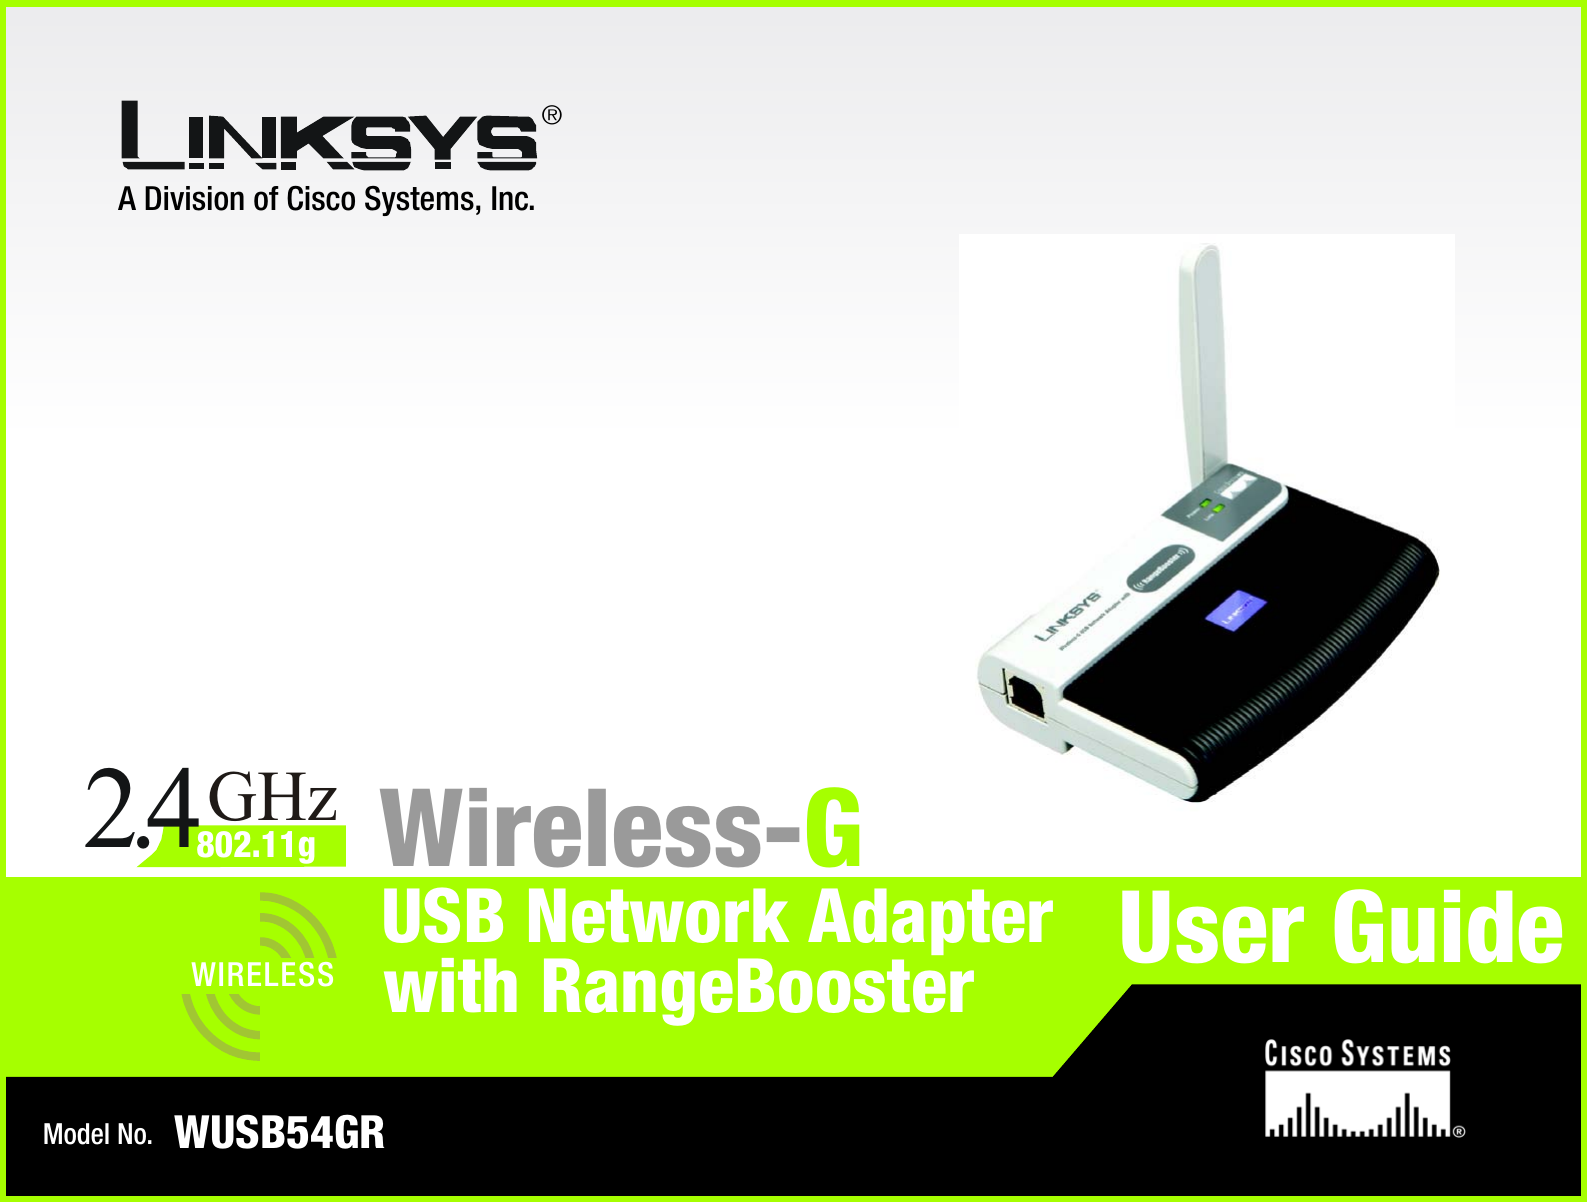 A Division of Cisco Systems, Inc.®Model No.USB Network AdapterWireless-GWUSB54GRUser GuideWIRELESSGHz2.4802.11gwith RangeBooster